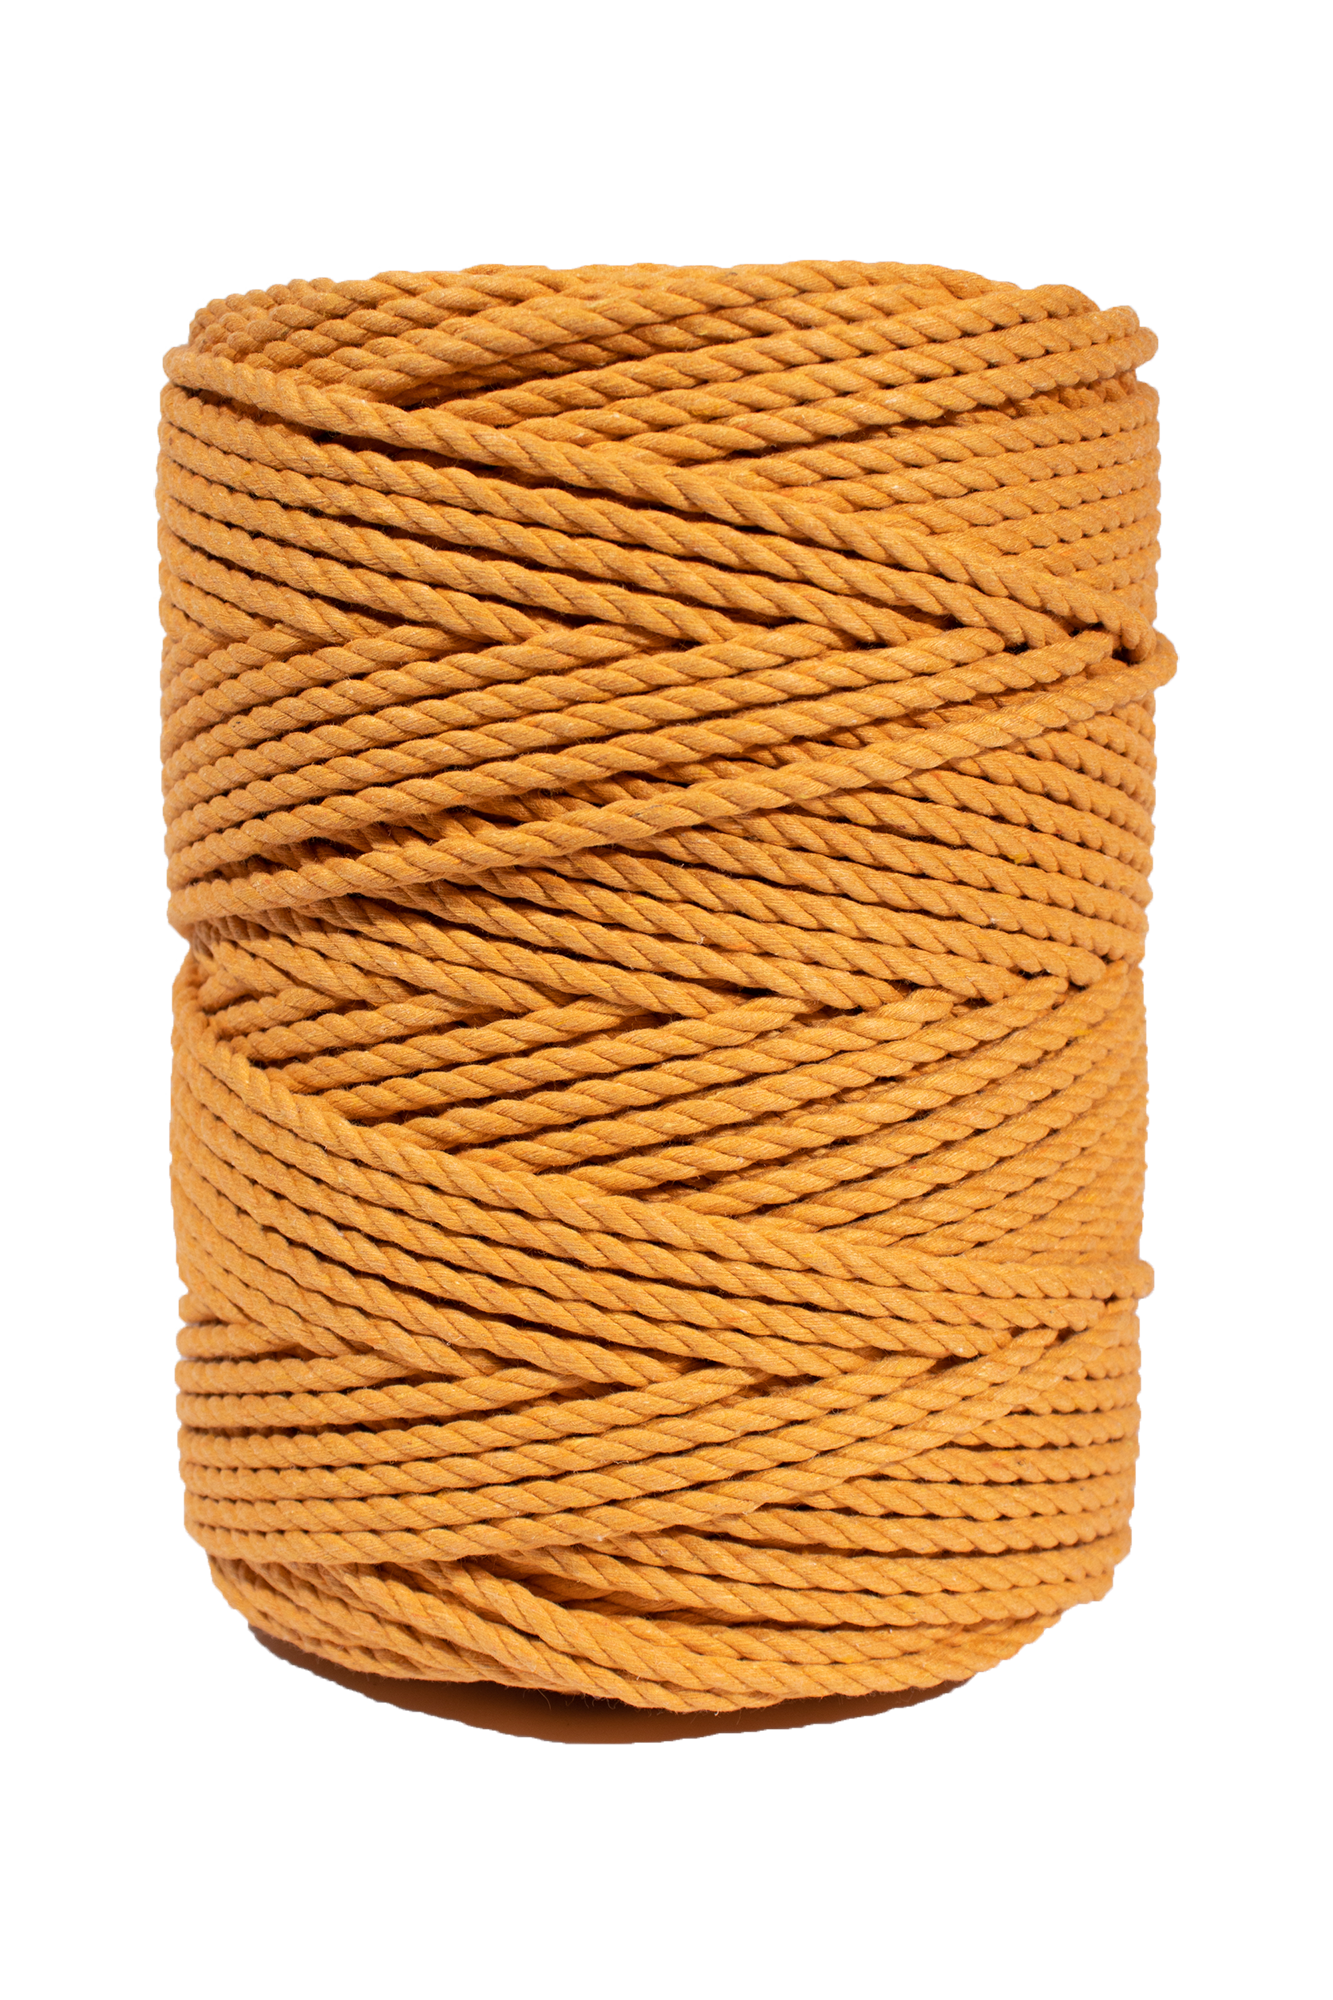 5mm cotton rope